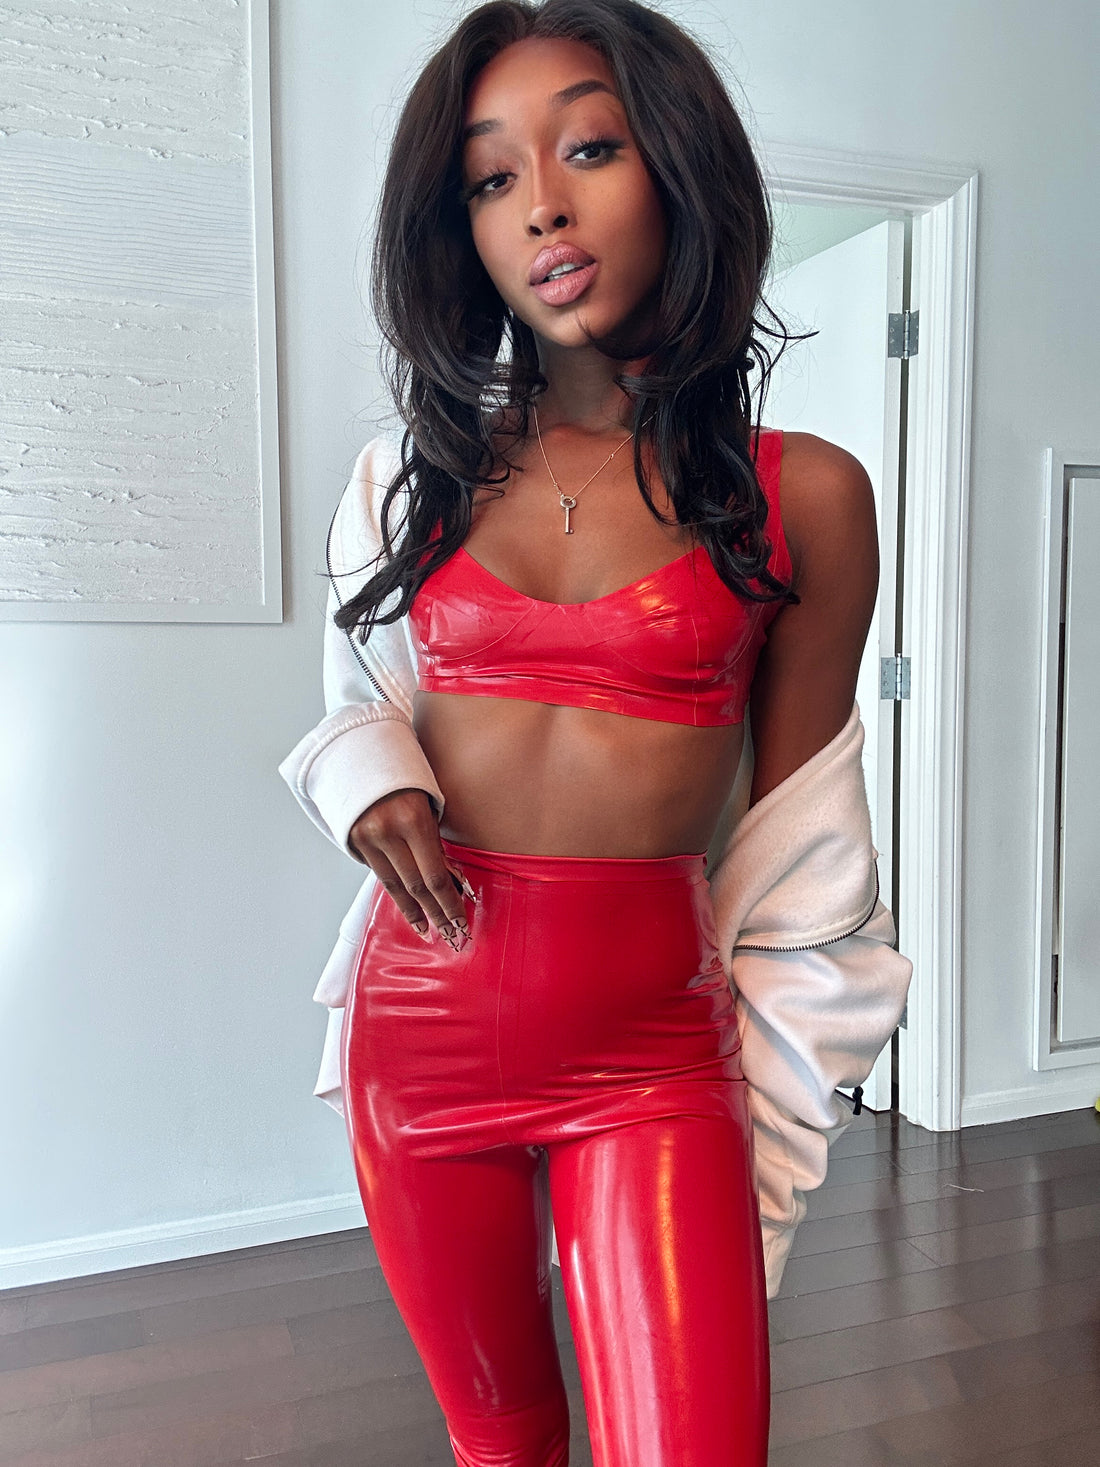 Jheanelle in a striking red 2-piece latex outfit, radiating confidence and allure